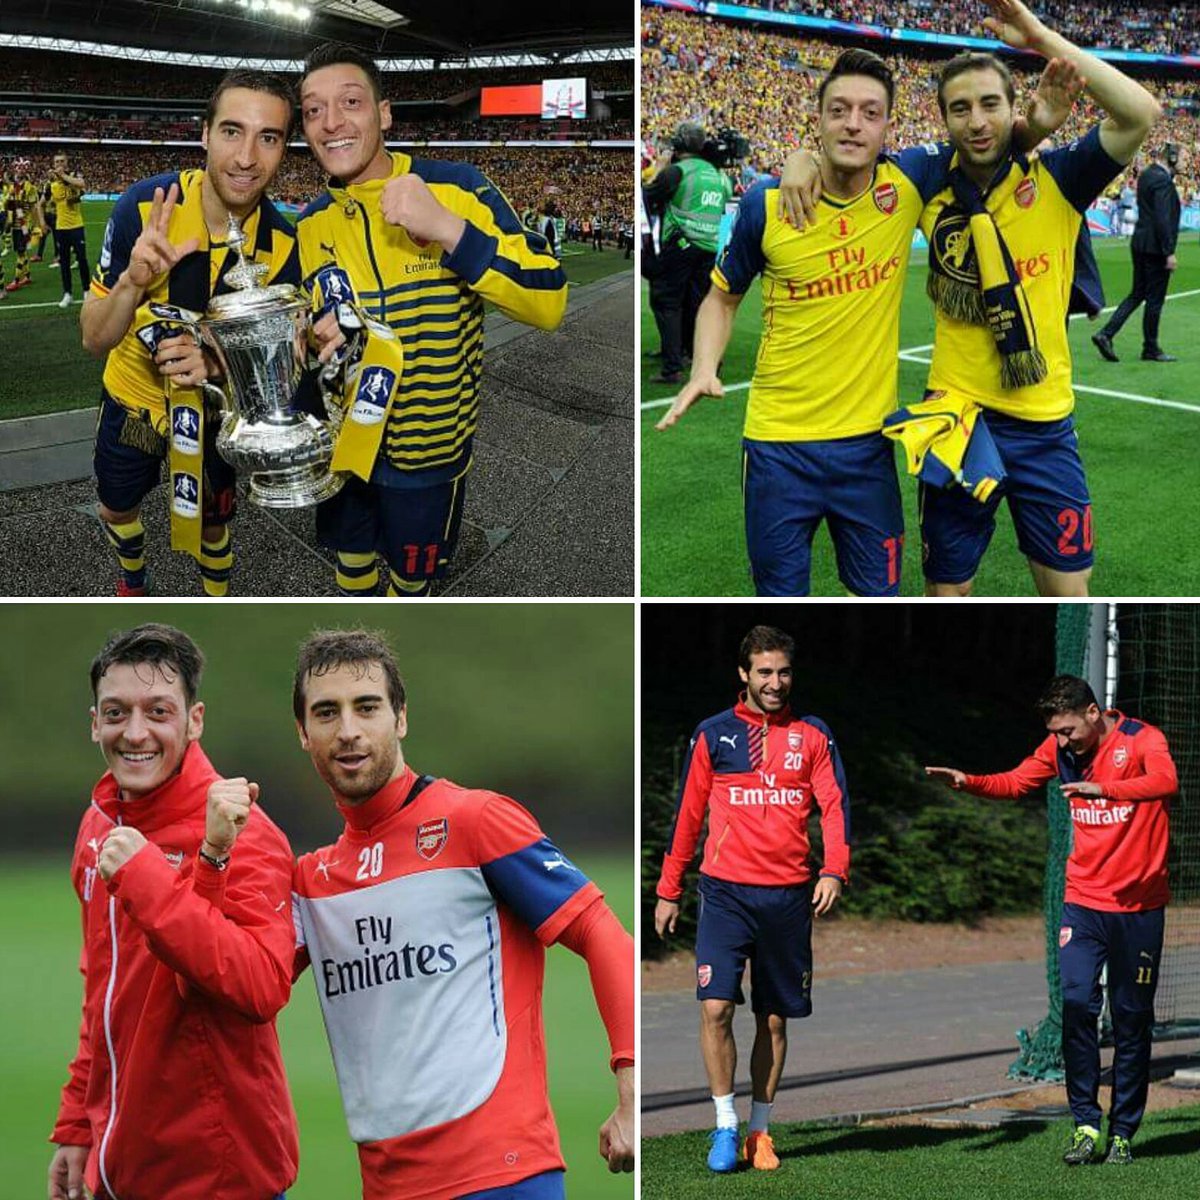 My best wishes to my Bro, Mathieu!!! 🚀👏🎉🎈 See you later, my friend! 🎁👍😉 #HappyBirthday #FelizCumpleaños #Flamini